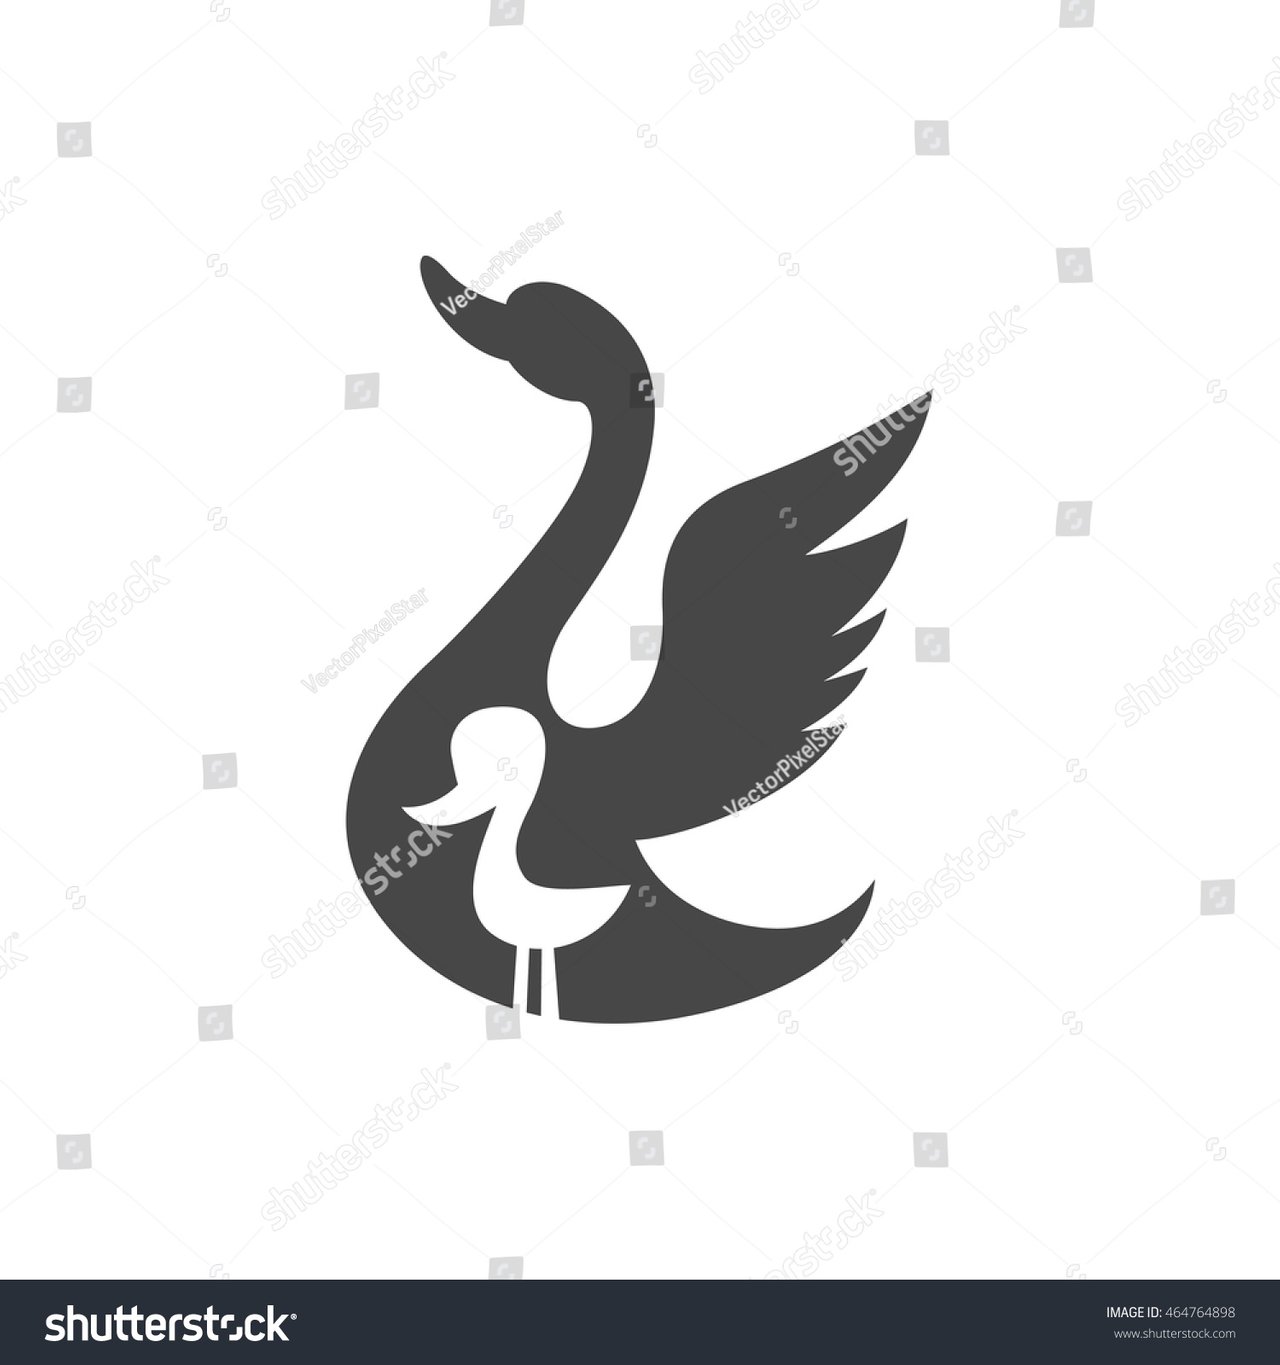 stock-vector-ugly-duckling-vector-graphic-illustration-logo-isolated-on-white-background-464764898.jpg